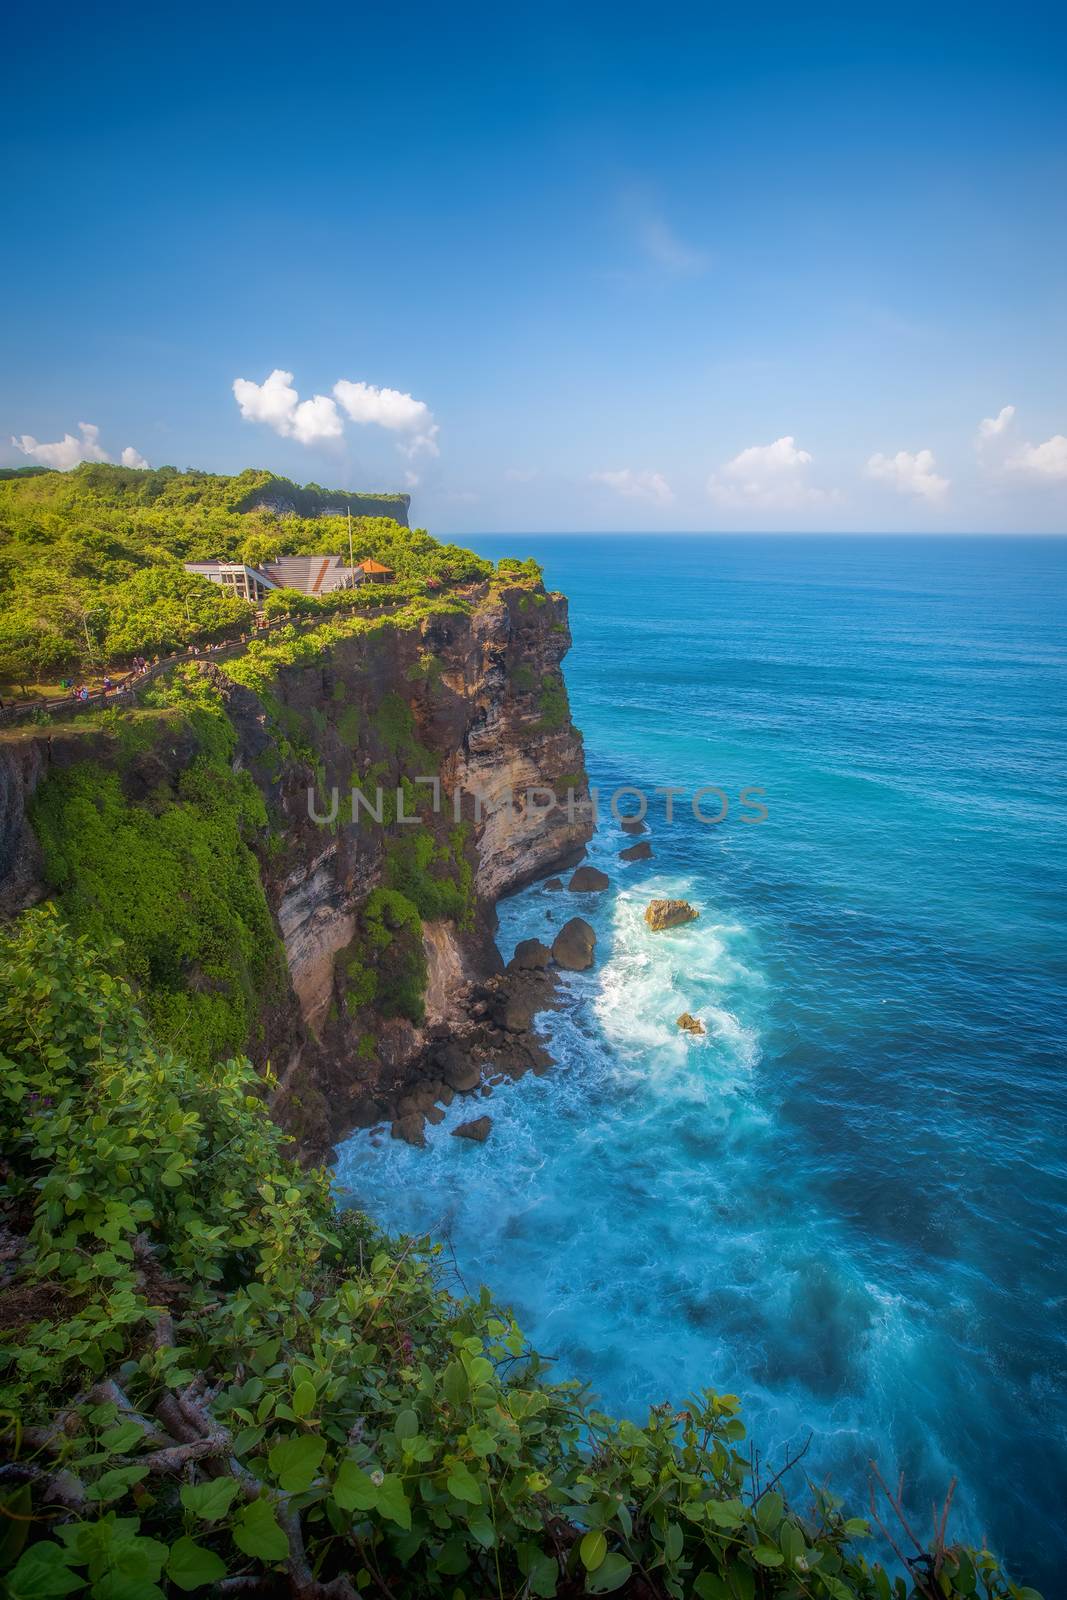 Surf waves and turqoise water along the coast of Bali